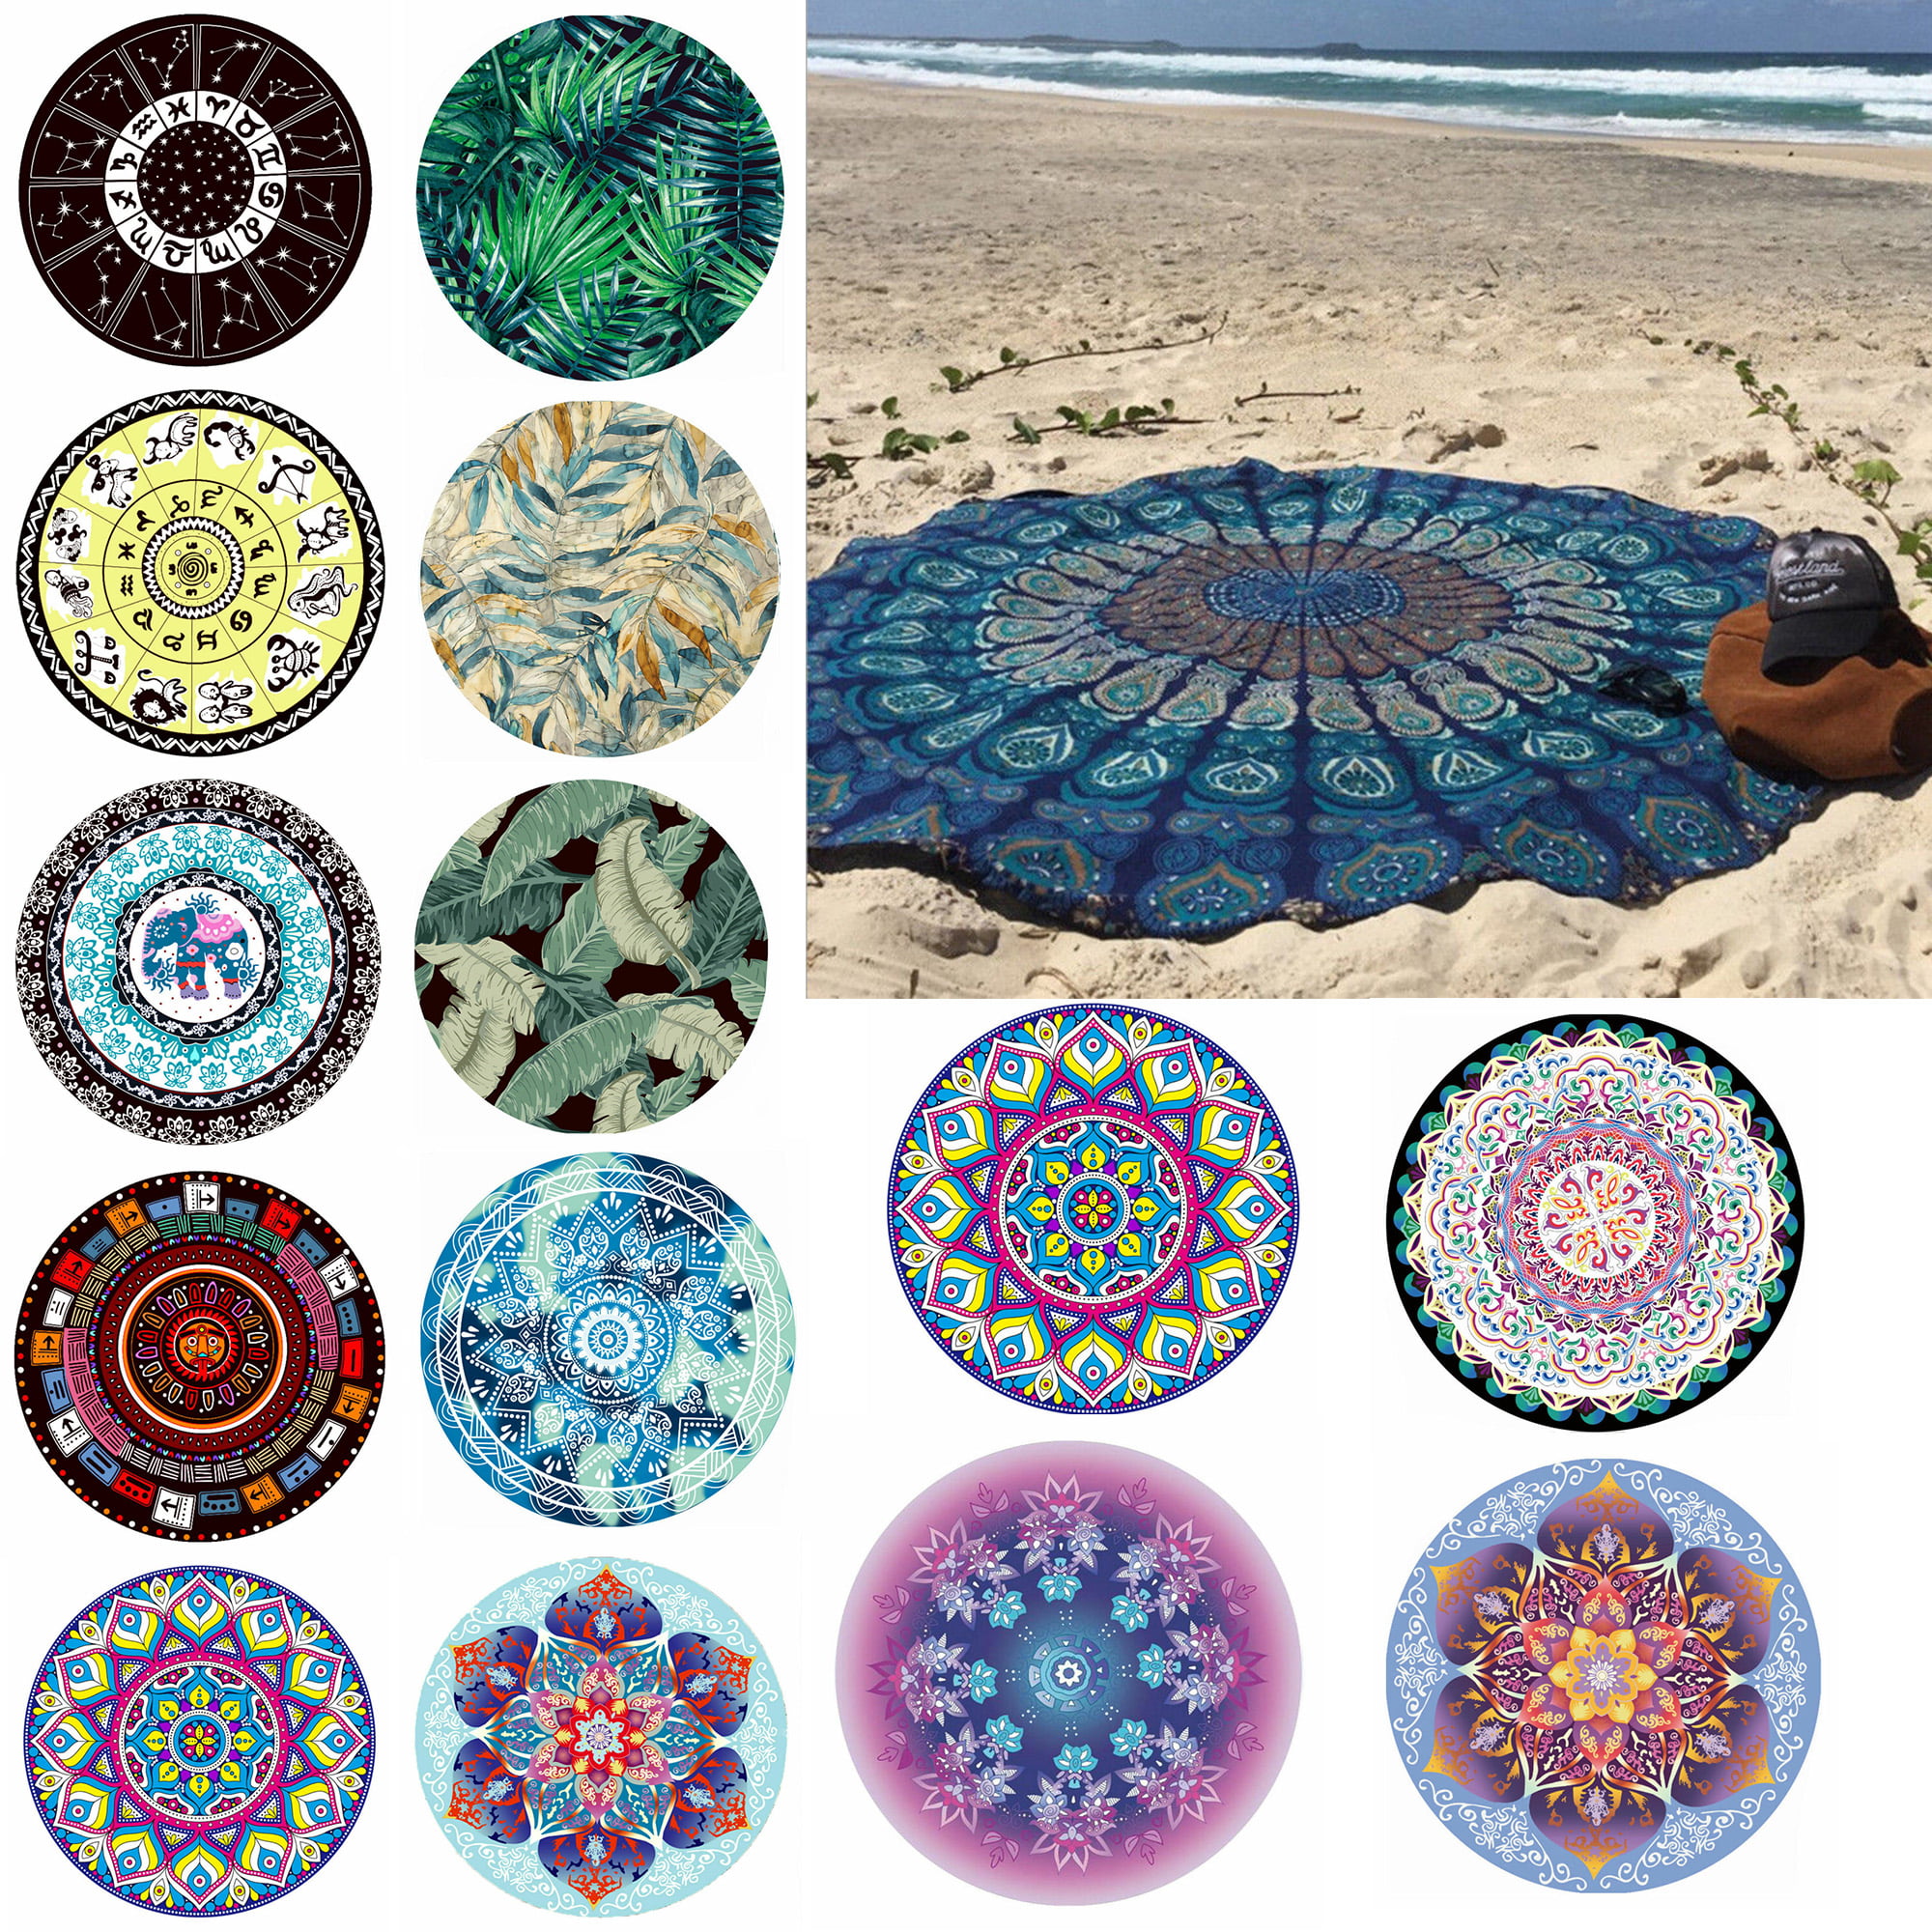 YJ Bear Abstract Pattern Non-woven Weaving Yoga Mat Blanket Wall Hanging Tapestry Rectangle Indian Mandala Boho Beach Towel Throw Table Cloth Cover 59 X 51